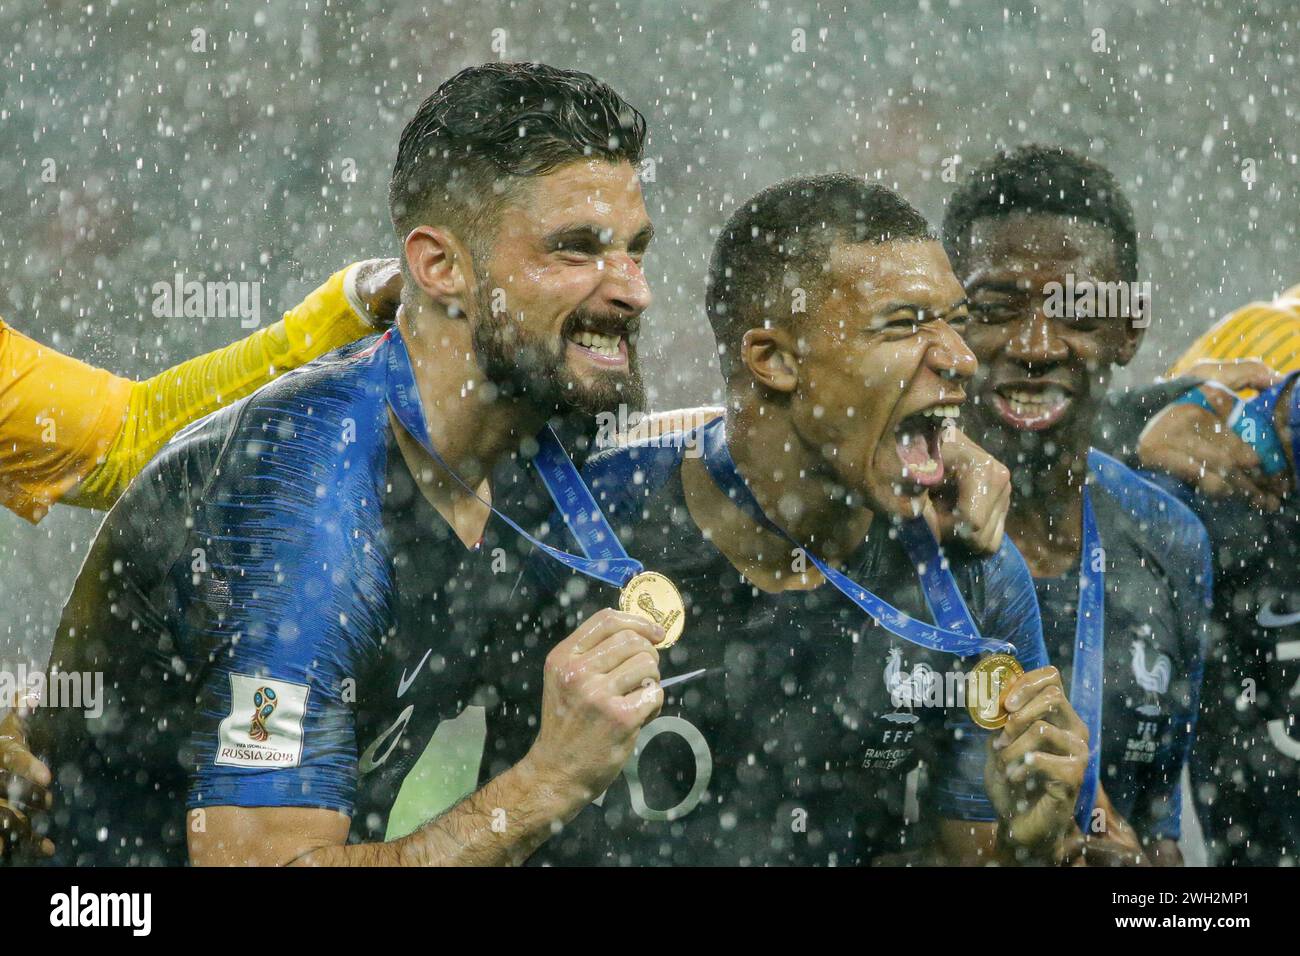 Moscow, Russia. 15th July, 2018. Olivier Giroud of France (L), Kylian Mbappe of France (C) and Ousmane Dembele of France (R) seen with gold medals of the world championships during the FIFA World Cup 2018 Final match between France and Croatia at Luzhniki Stadium. Final score: France 4:2 Croatia. Credit: SOPA Images Limited/Alamy Live News Stock Photo